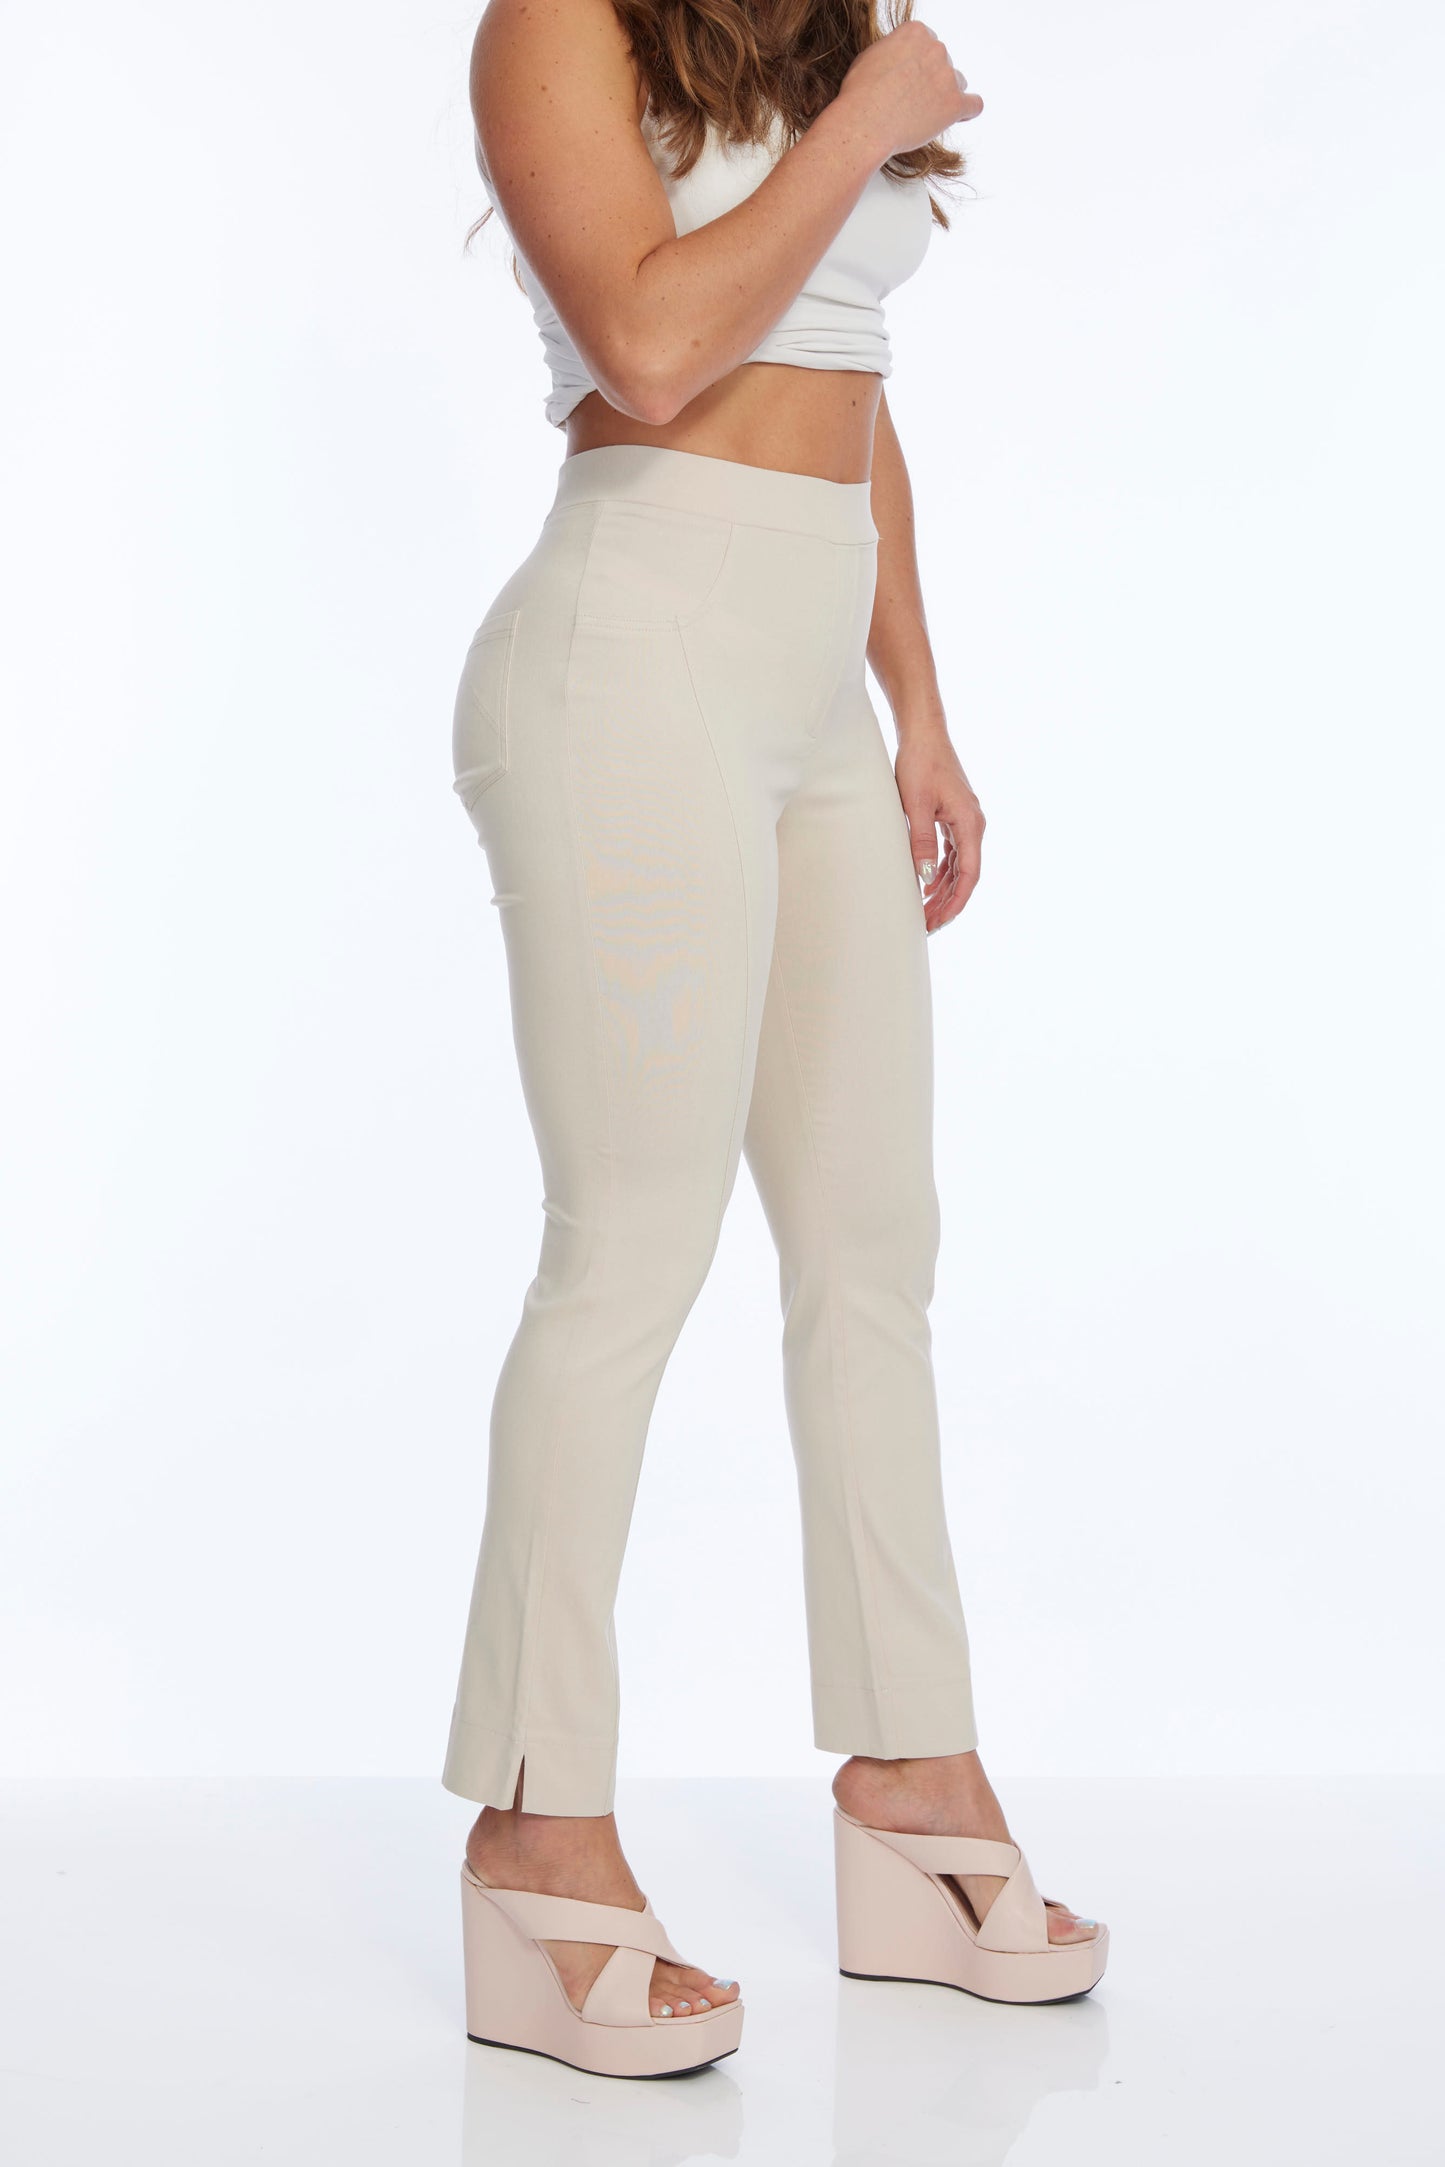 stitch front pants for women 